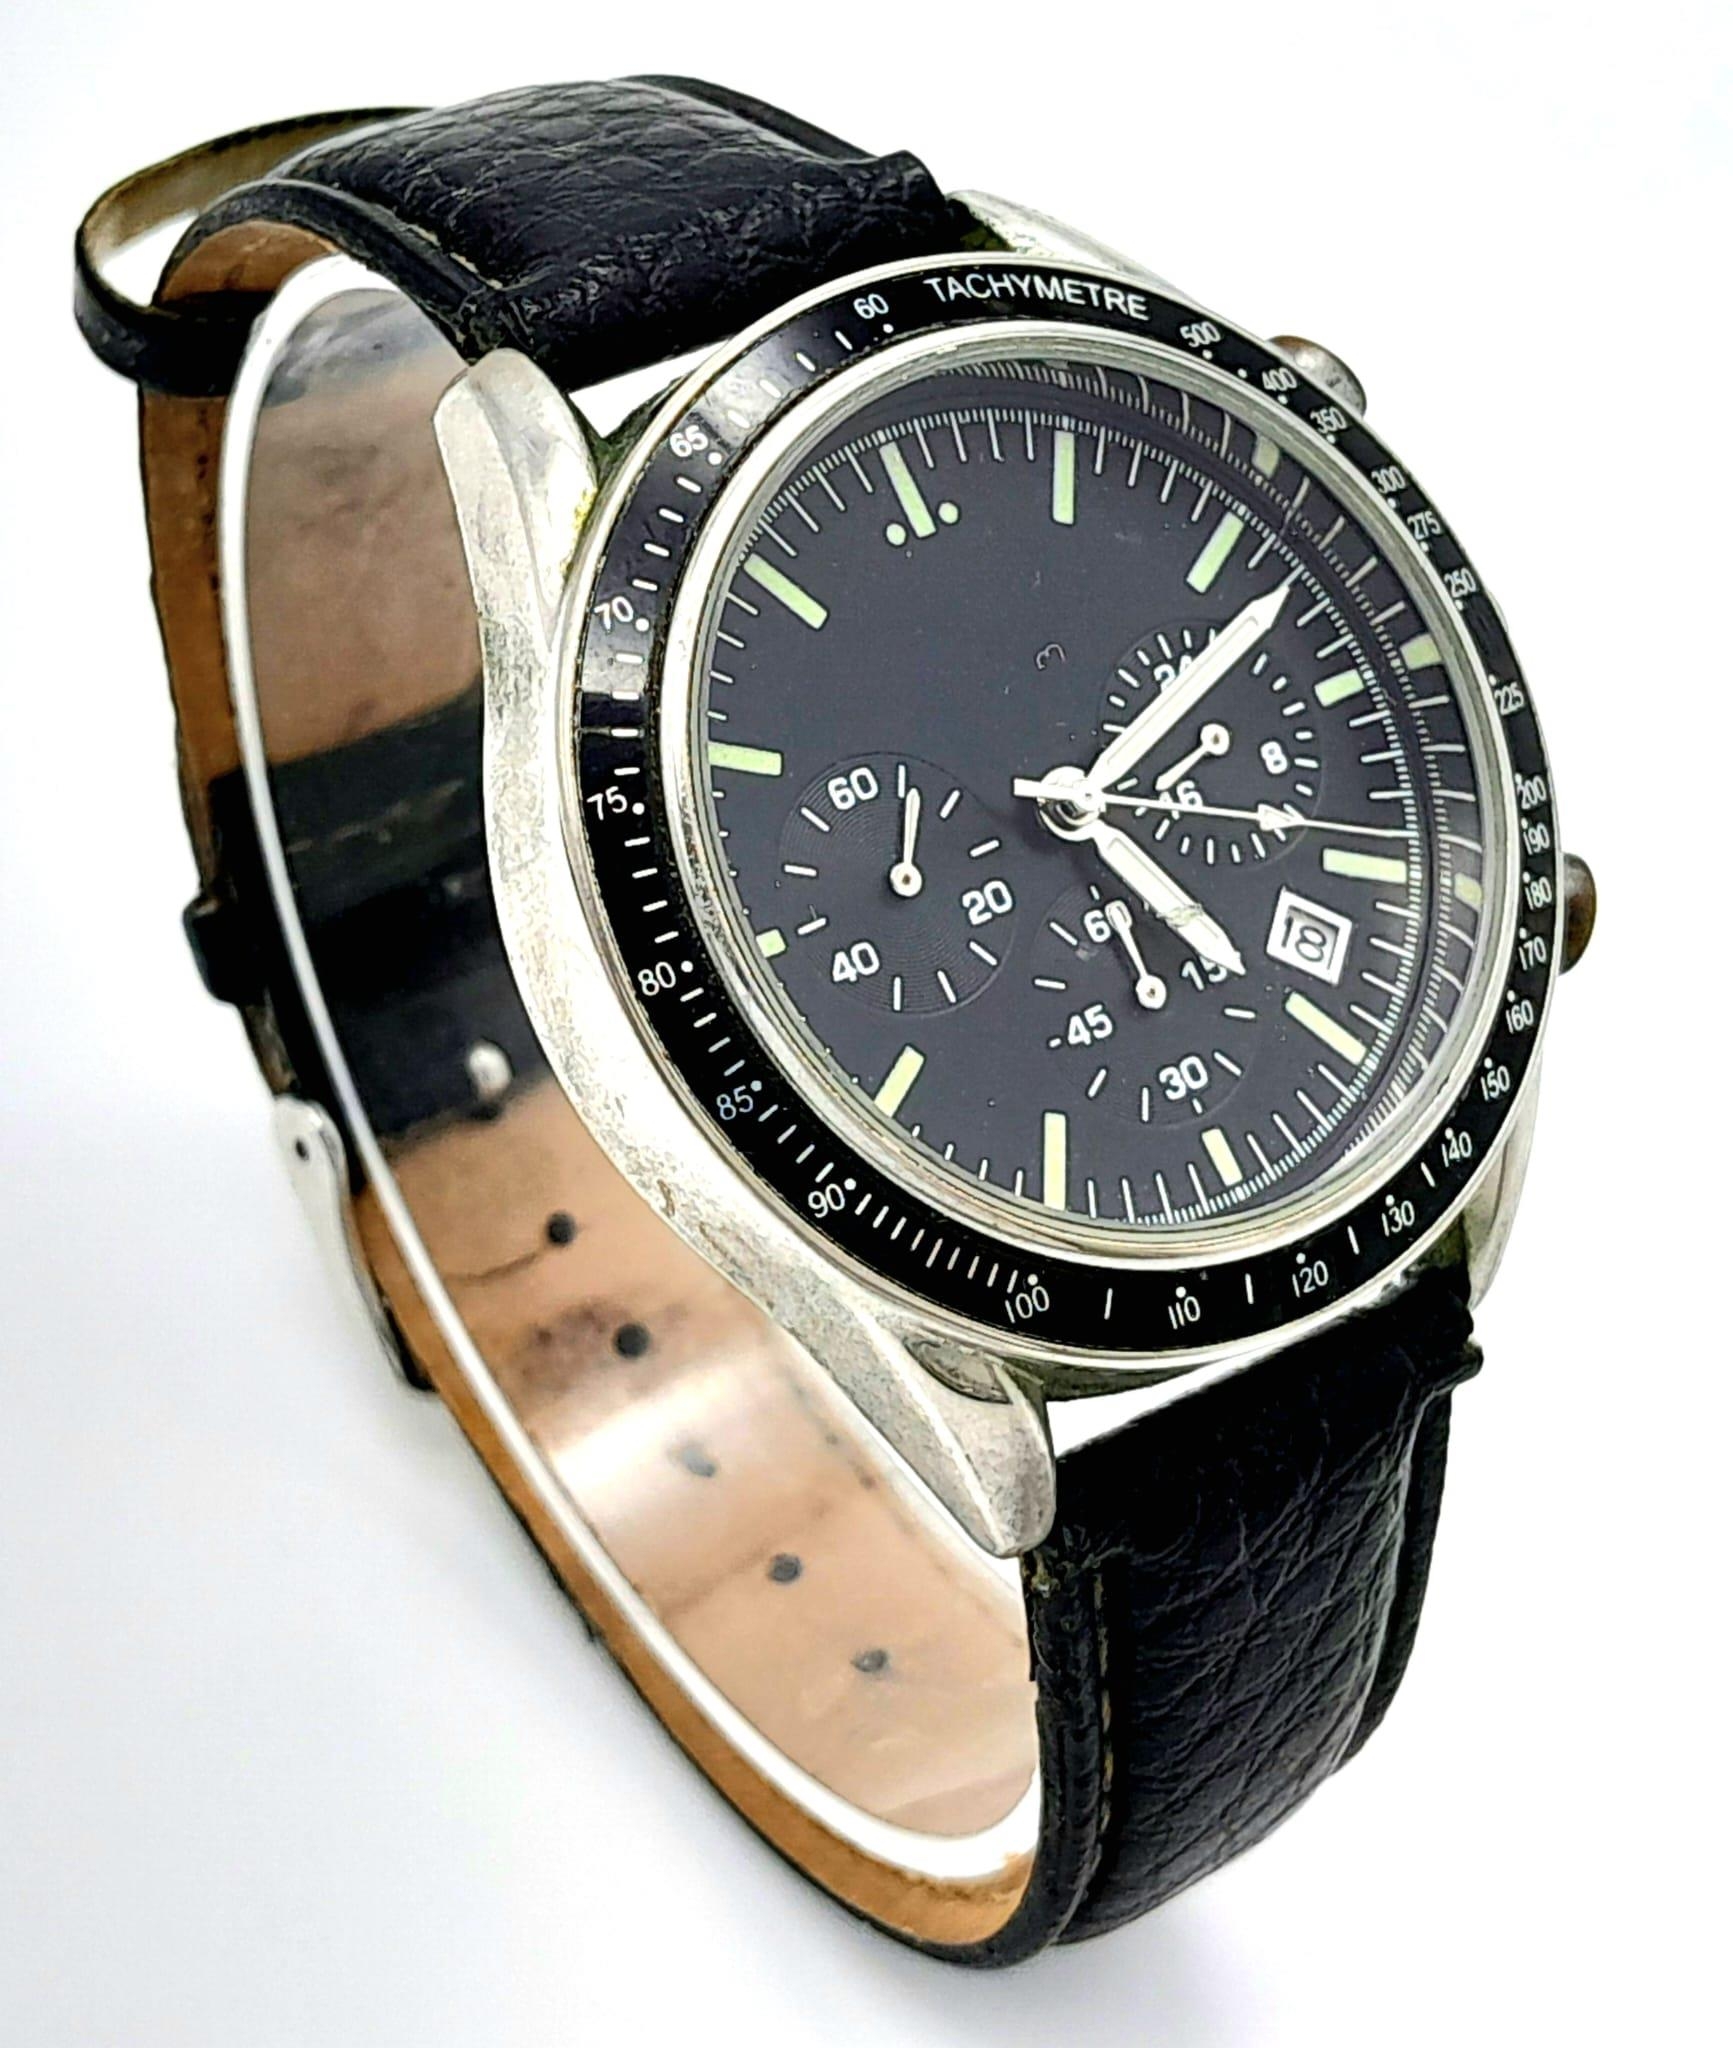 A United States Nasa Astronaut Tribute Watch. Black leather strap (worn), Stainless steel case - - Image 3 of 6